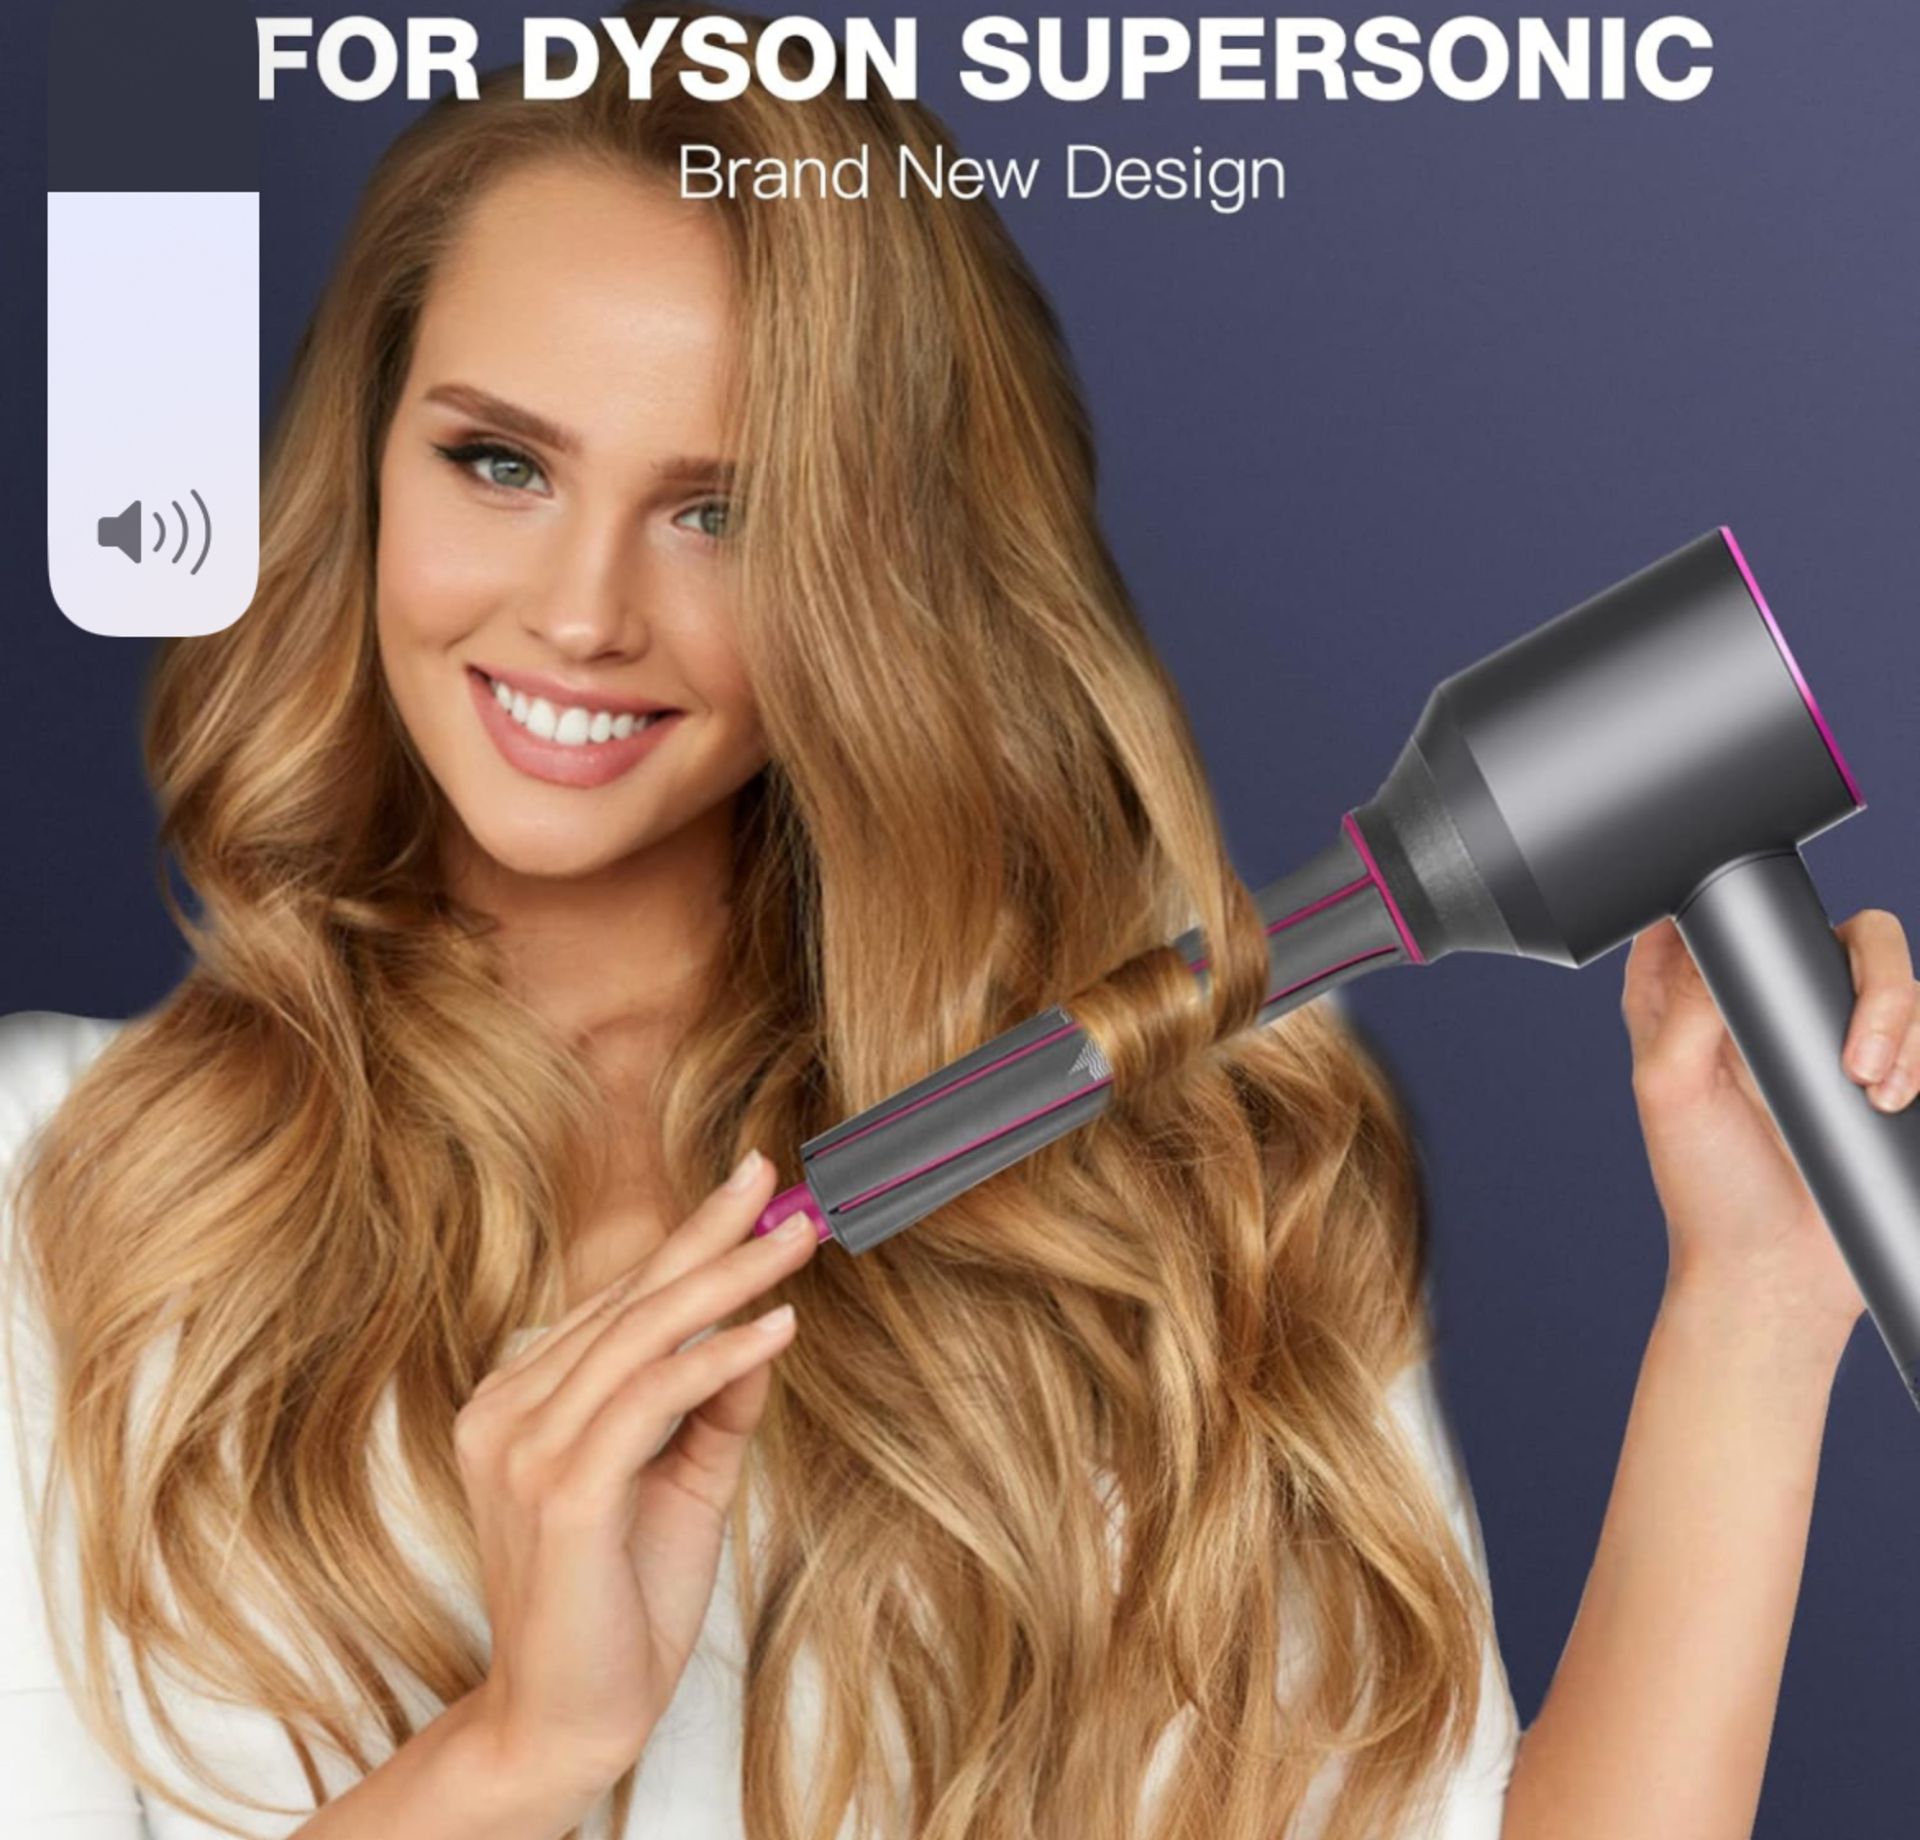 15x LOCINTE Multifunctional 2 in 1 Hairdryer Accessory, Compatible With Dyson Supersonic - Image 4 of 5